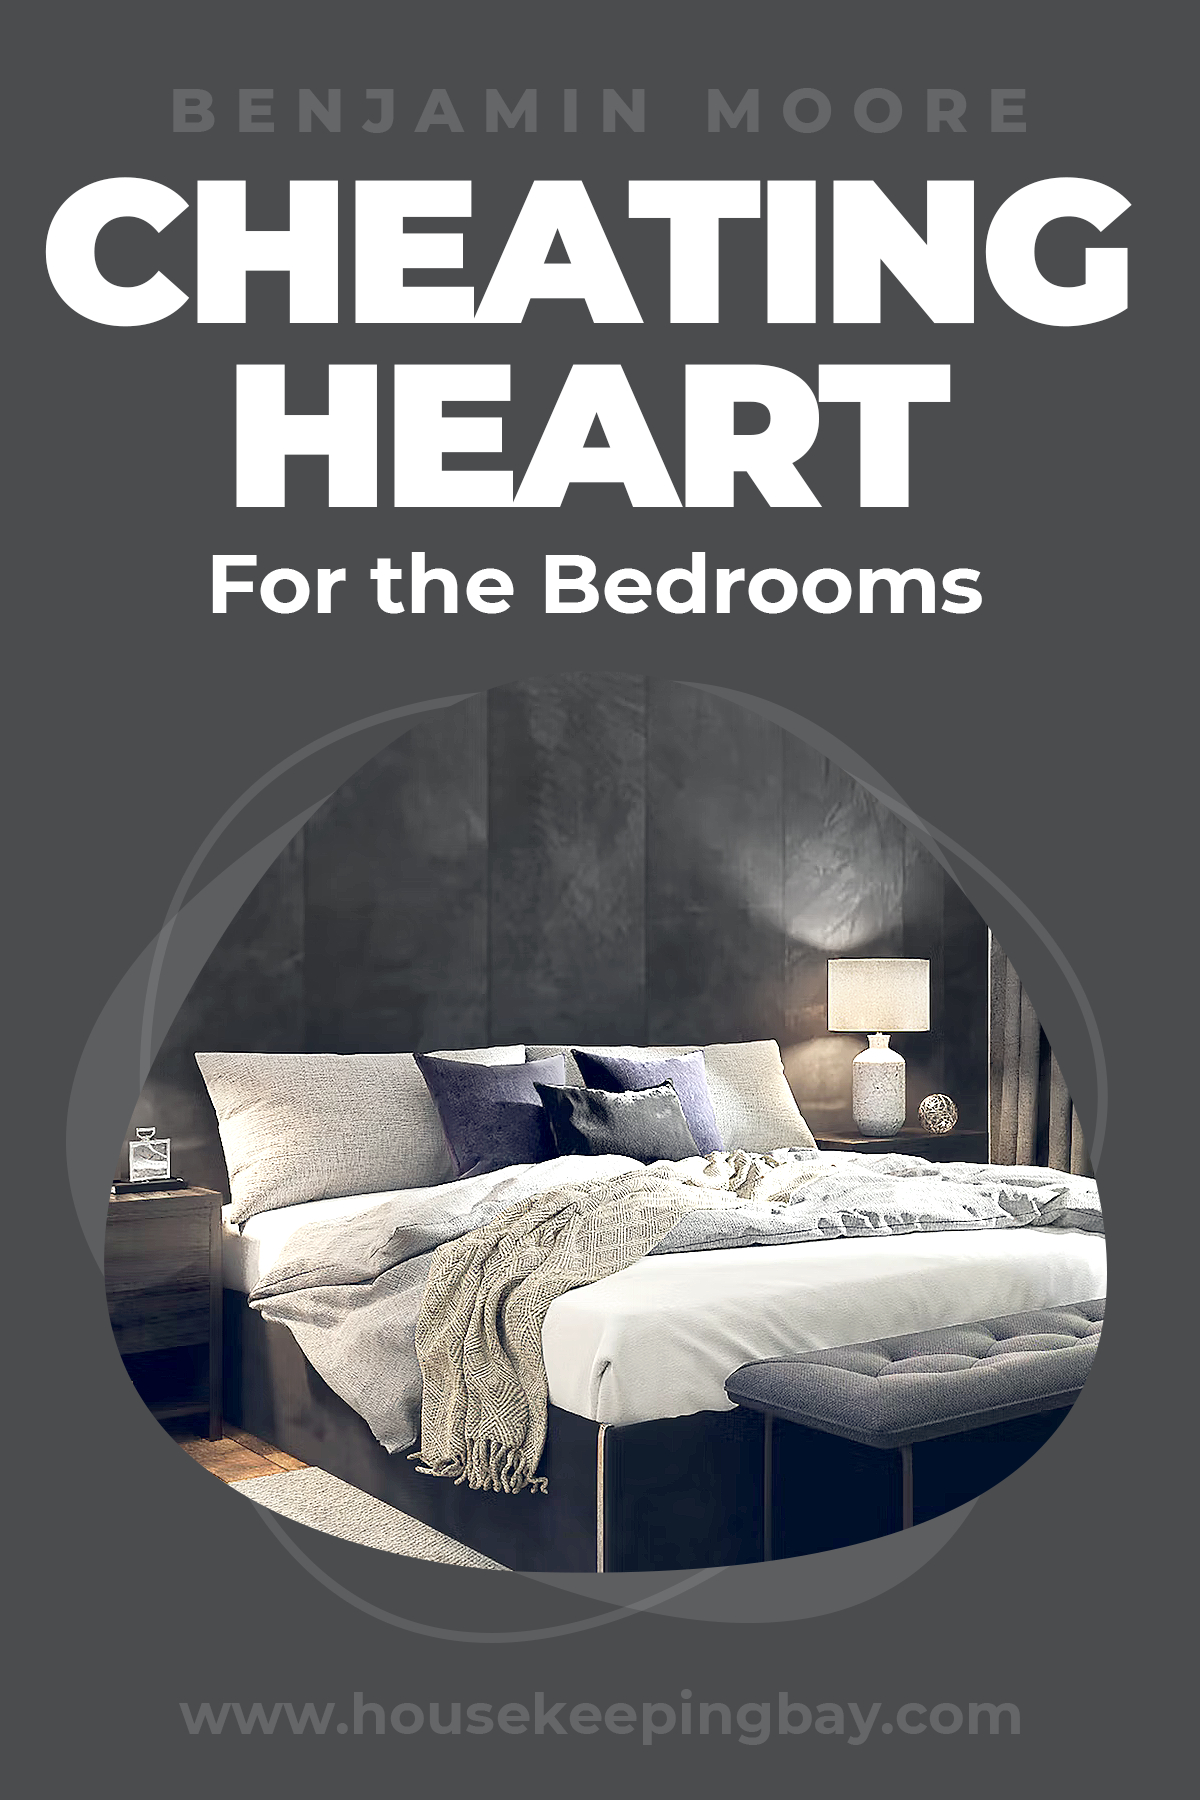 Cheating Heart for the bedrooms